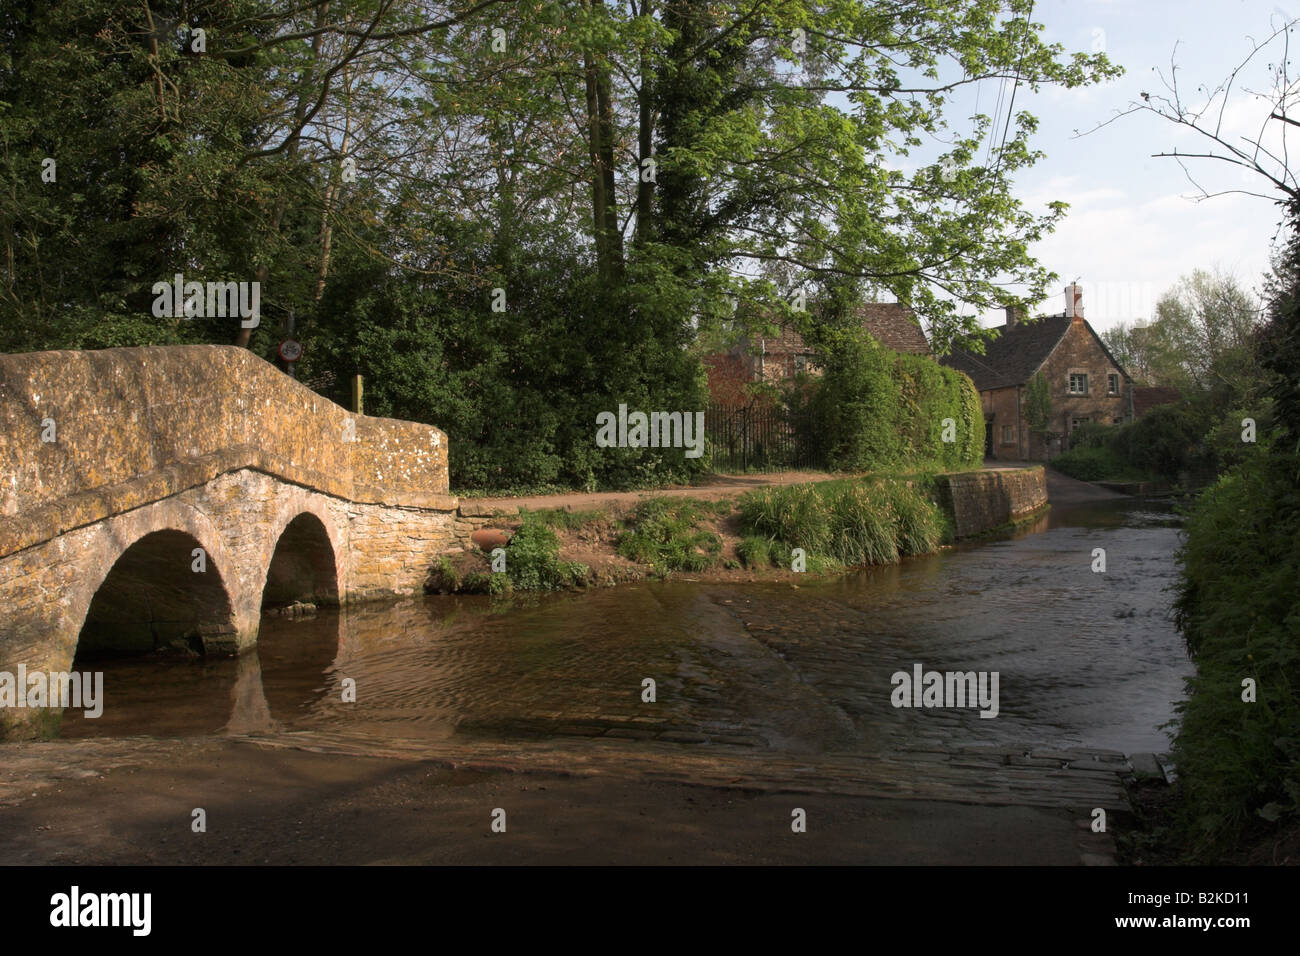 The packhorse bridge over Byde Brook ford in the picturesque village of Lacock, Wiltshire, England, UK Stock Photo